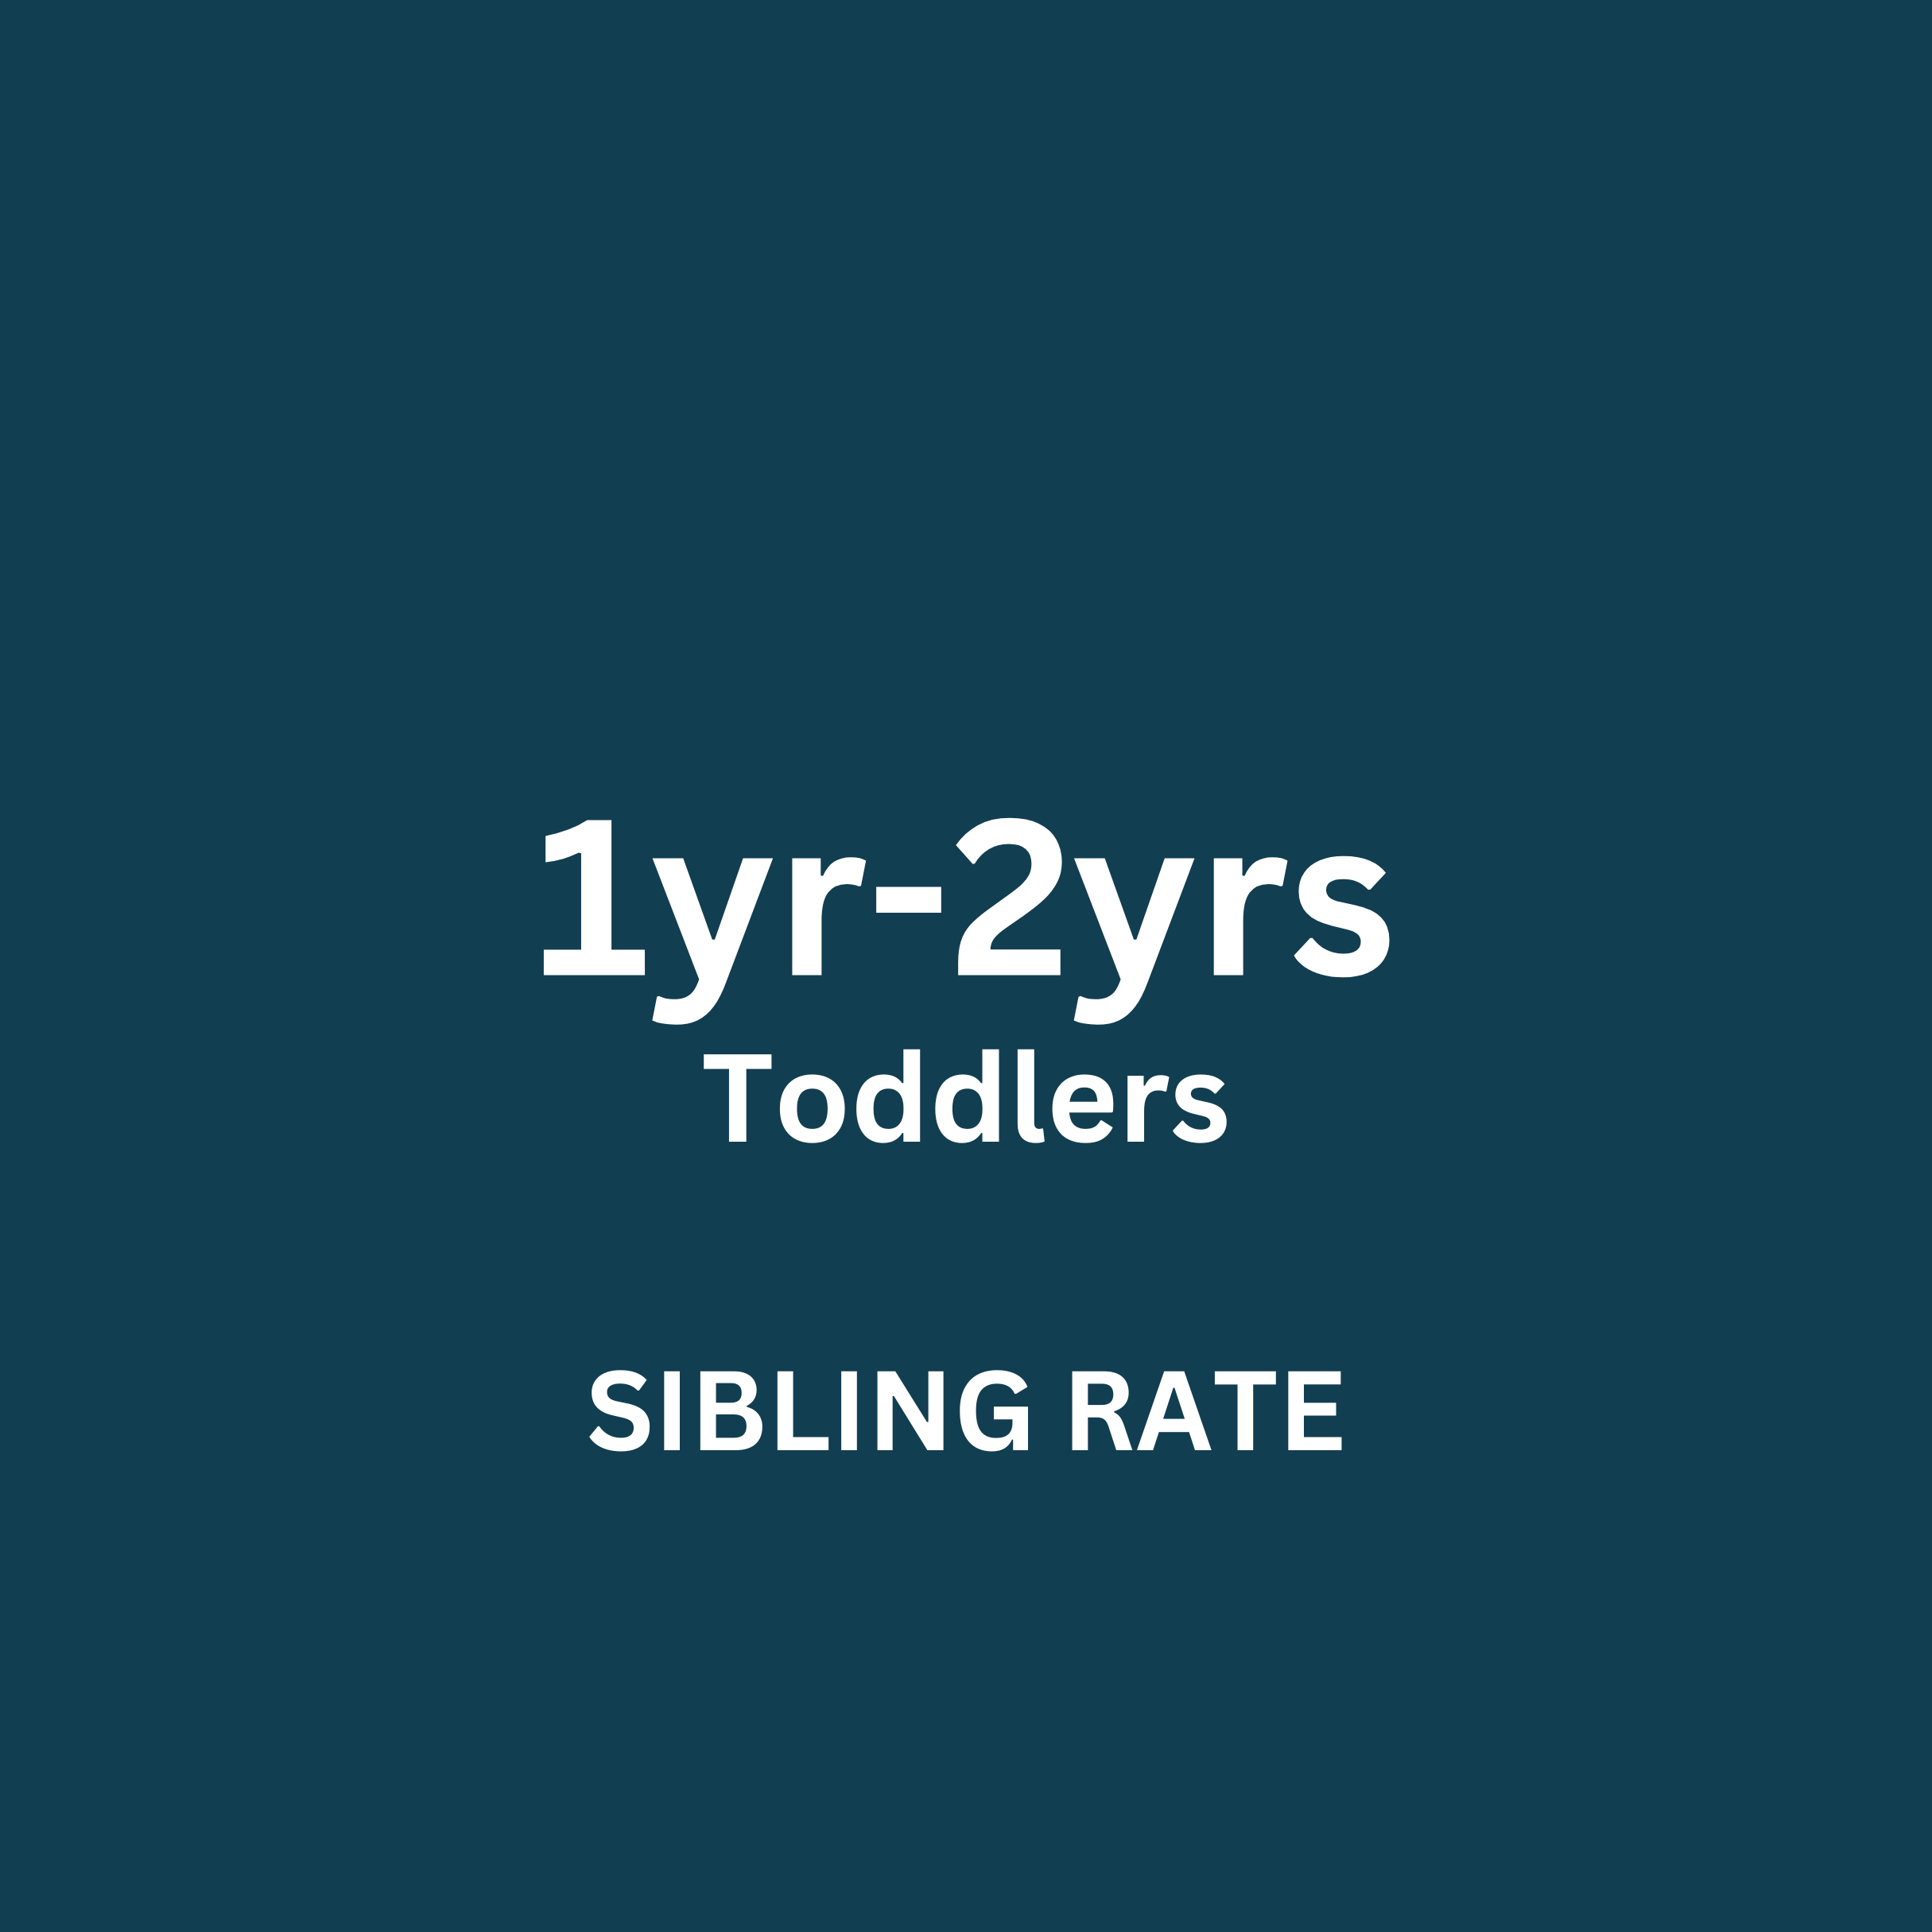 Toddlers 1yr-2yrs (Sibling Rate)